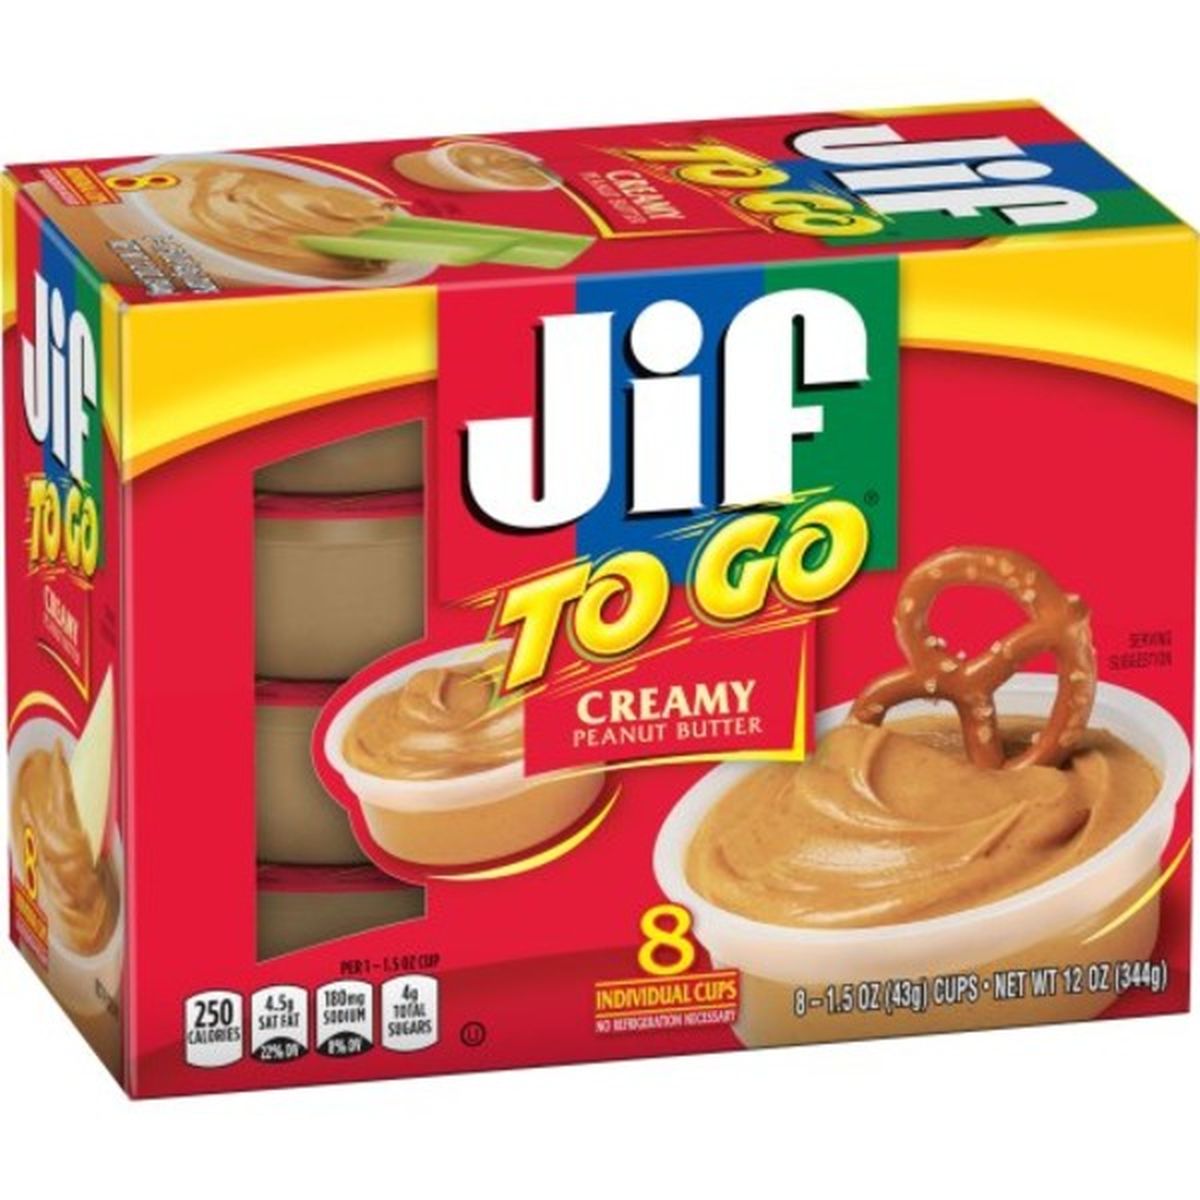 Calories in Jif To Go Peanut Butter